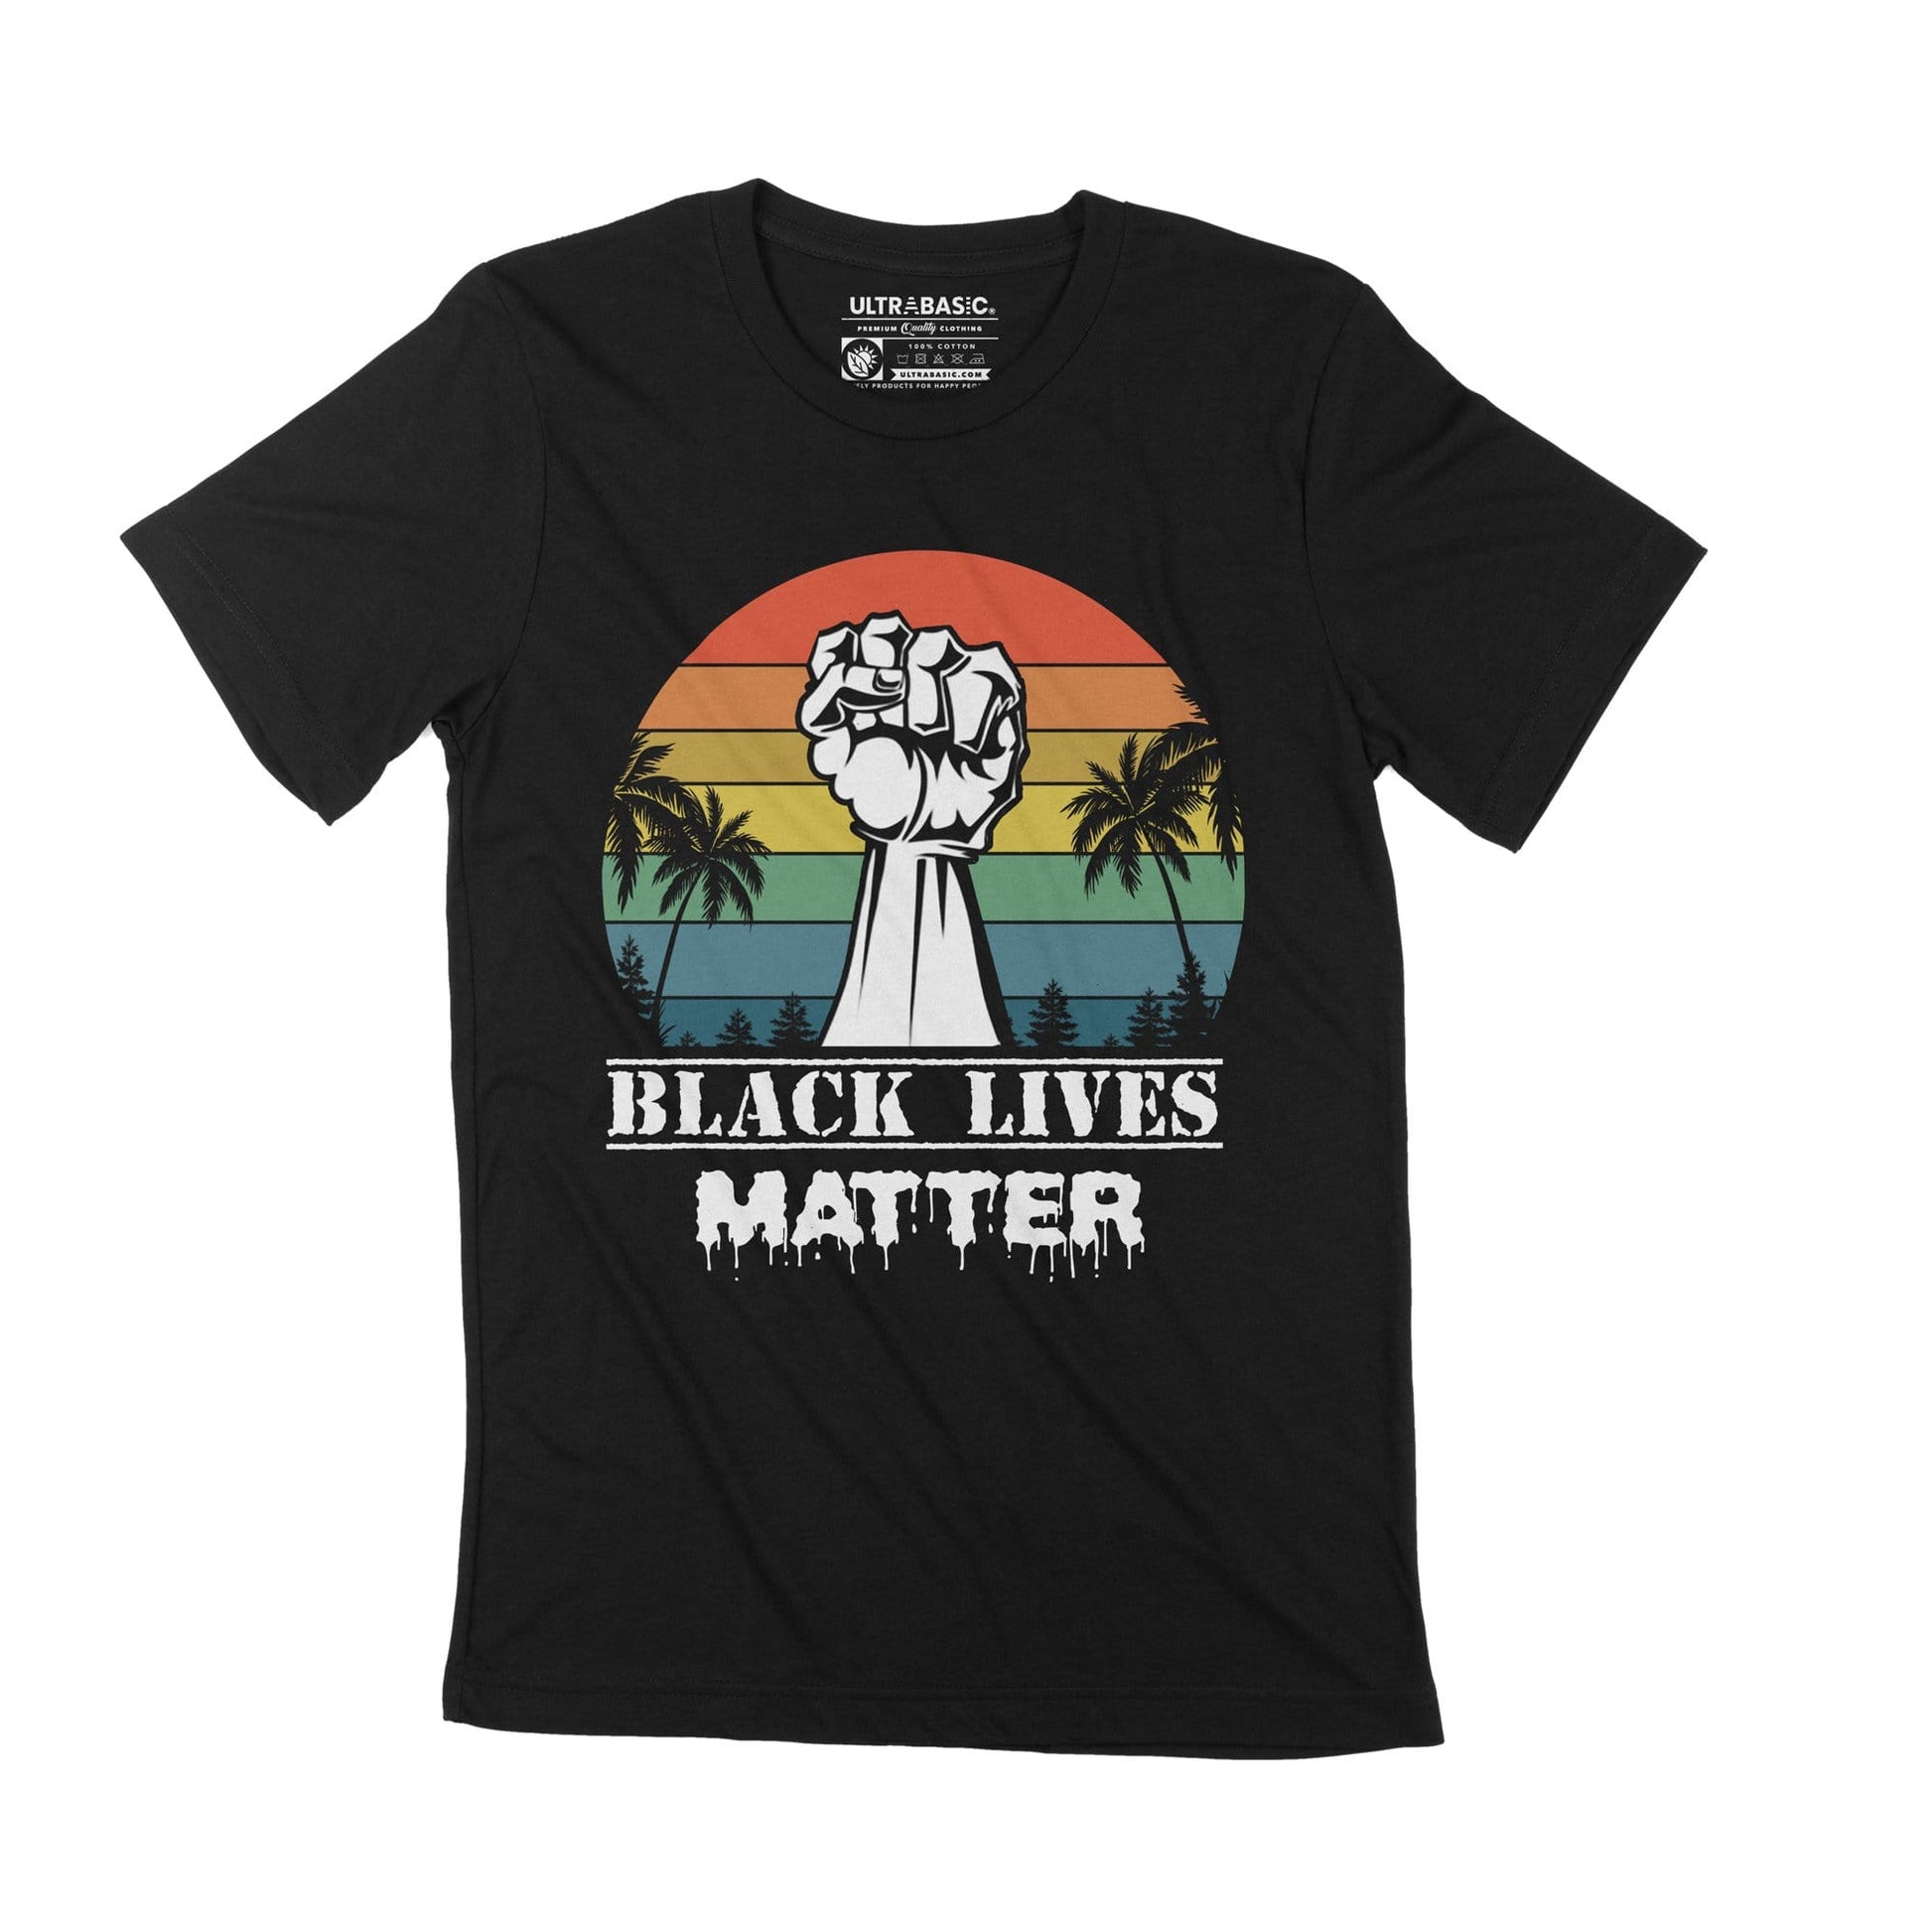 i cant breathe tshirt george floyd justice protest shirt love no hate tees police brutality support clothing kindness over everything solidarity first equal rights freedom equality civil right empowerment no racism anti racist silence violence  